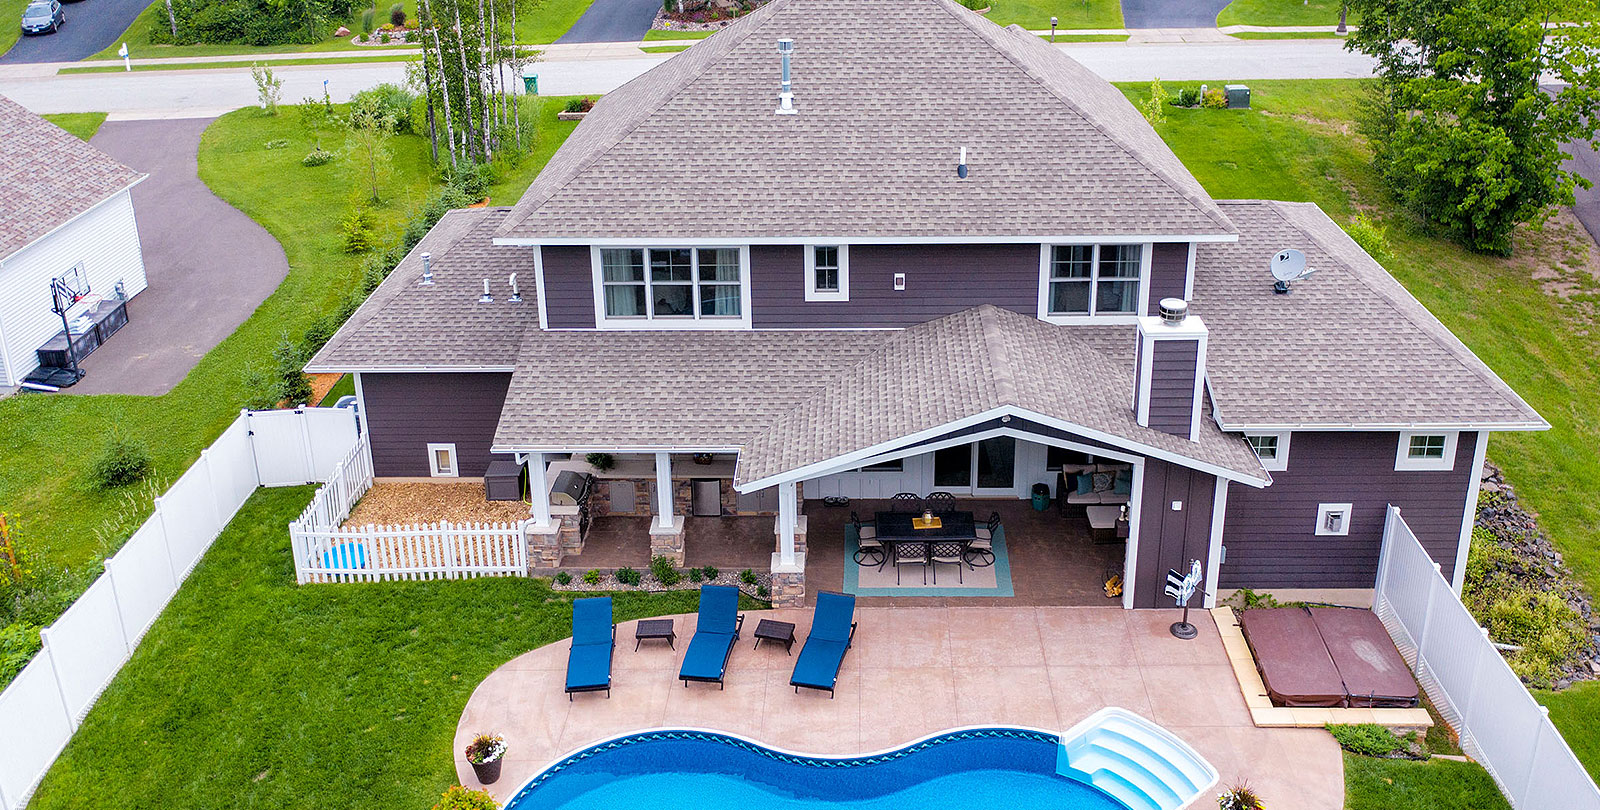 two-storey home with pool in backyard